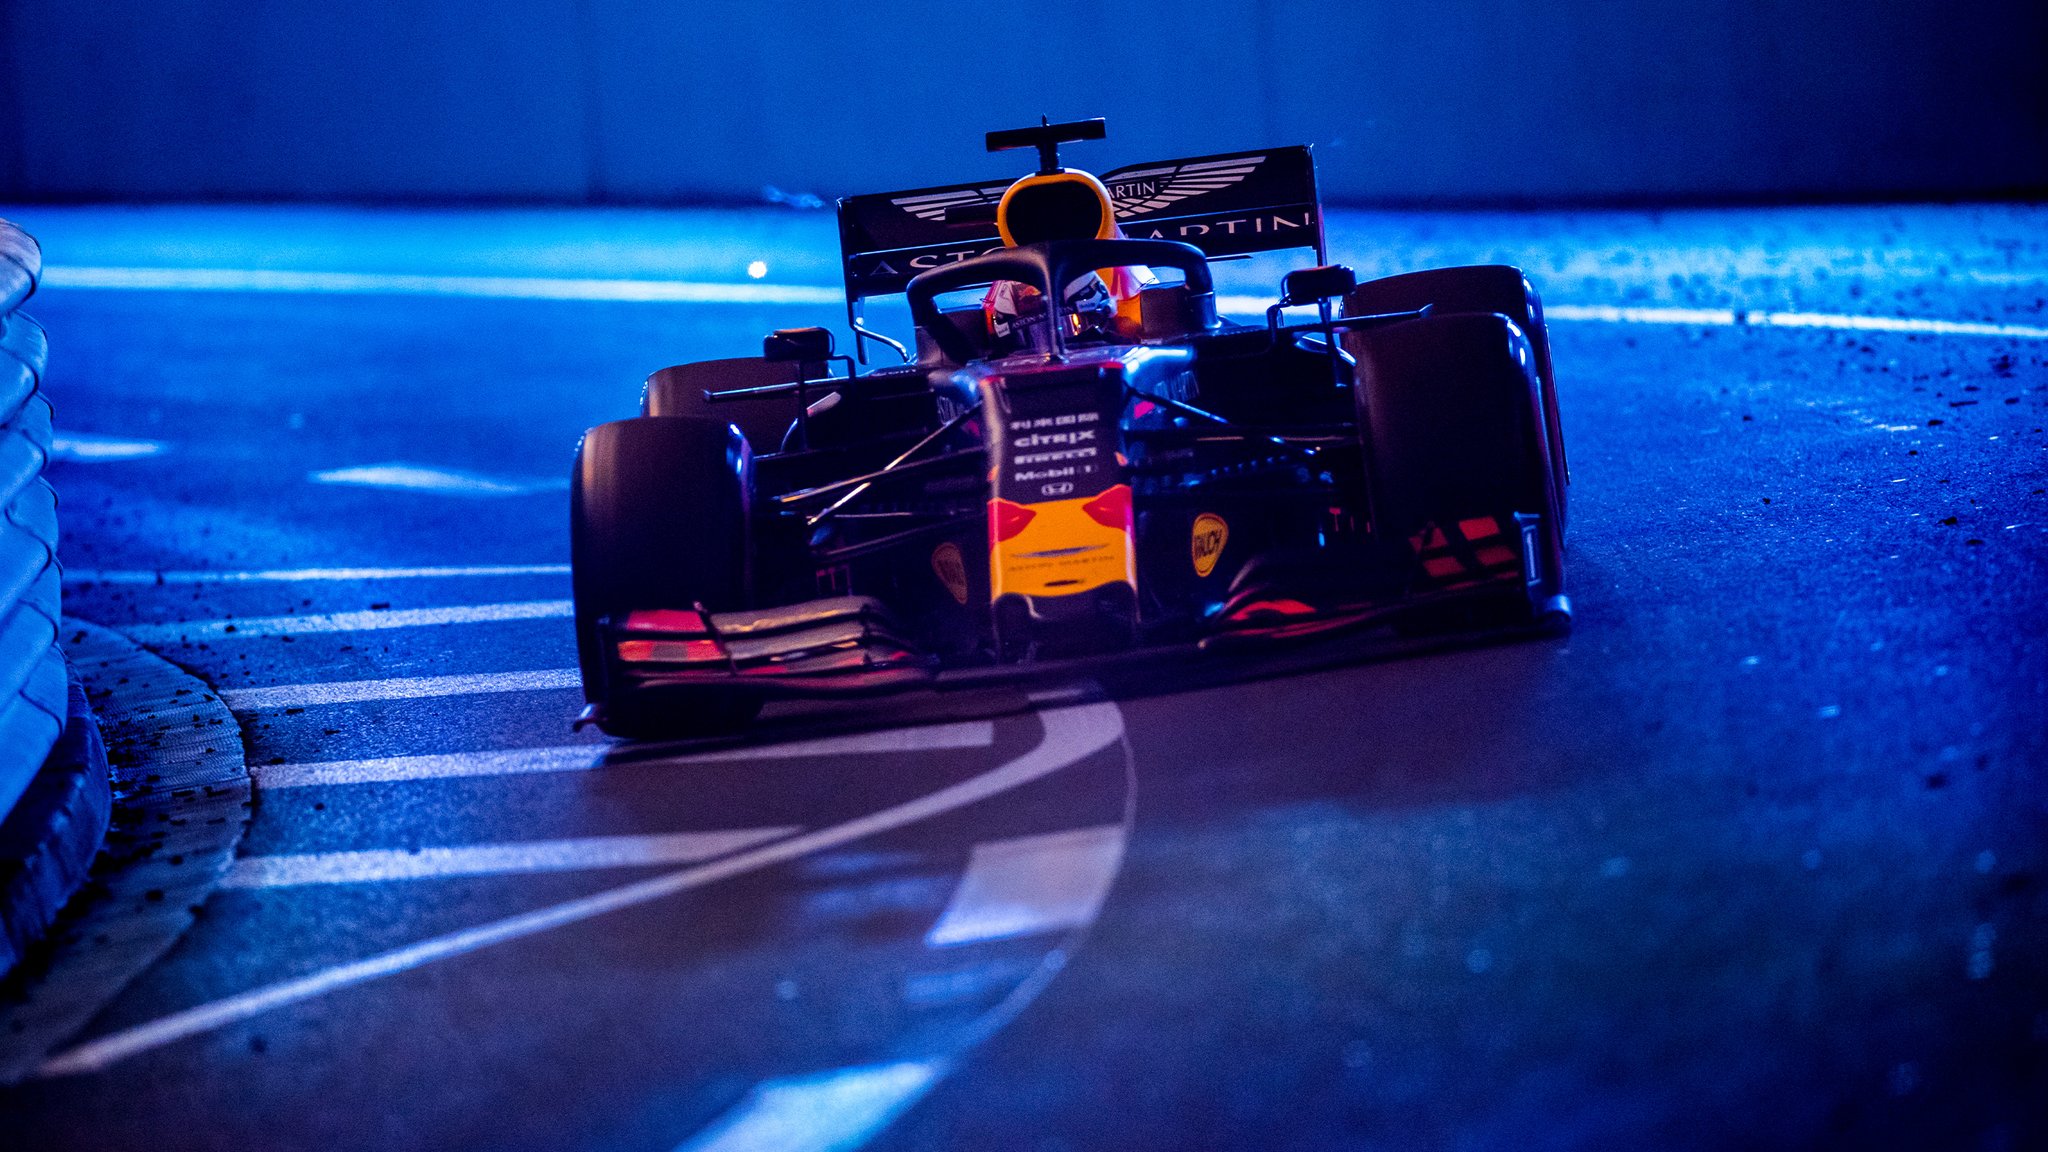 Aston Martin Red Bull Racing Top Of The Shots Our First Pick From A Stunning Selection Captured In 19 T Co 5kjtfgophw F1